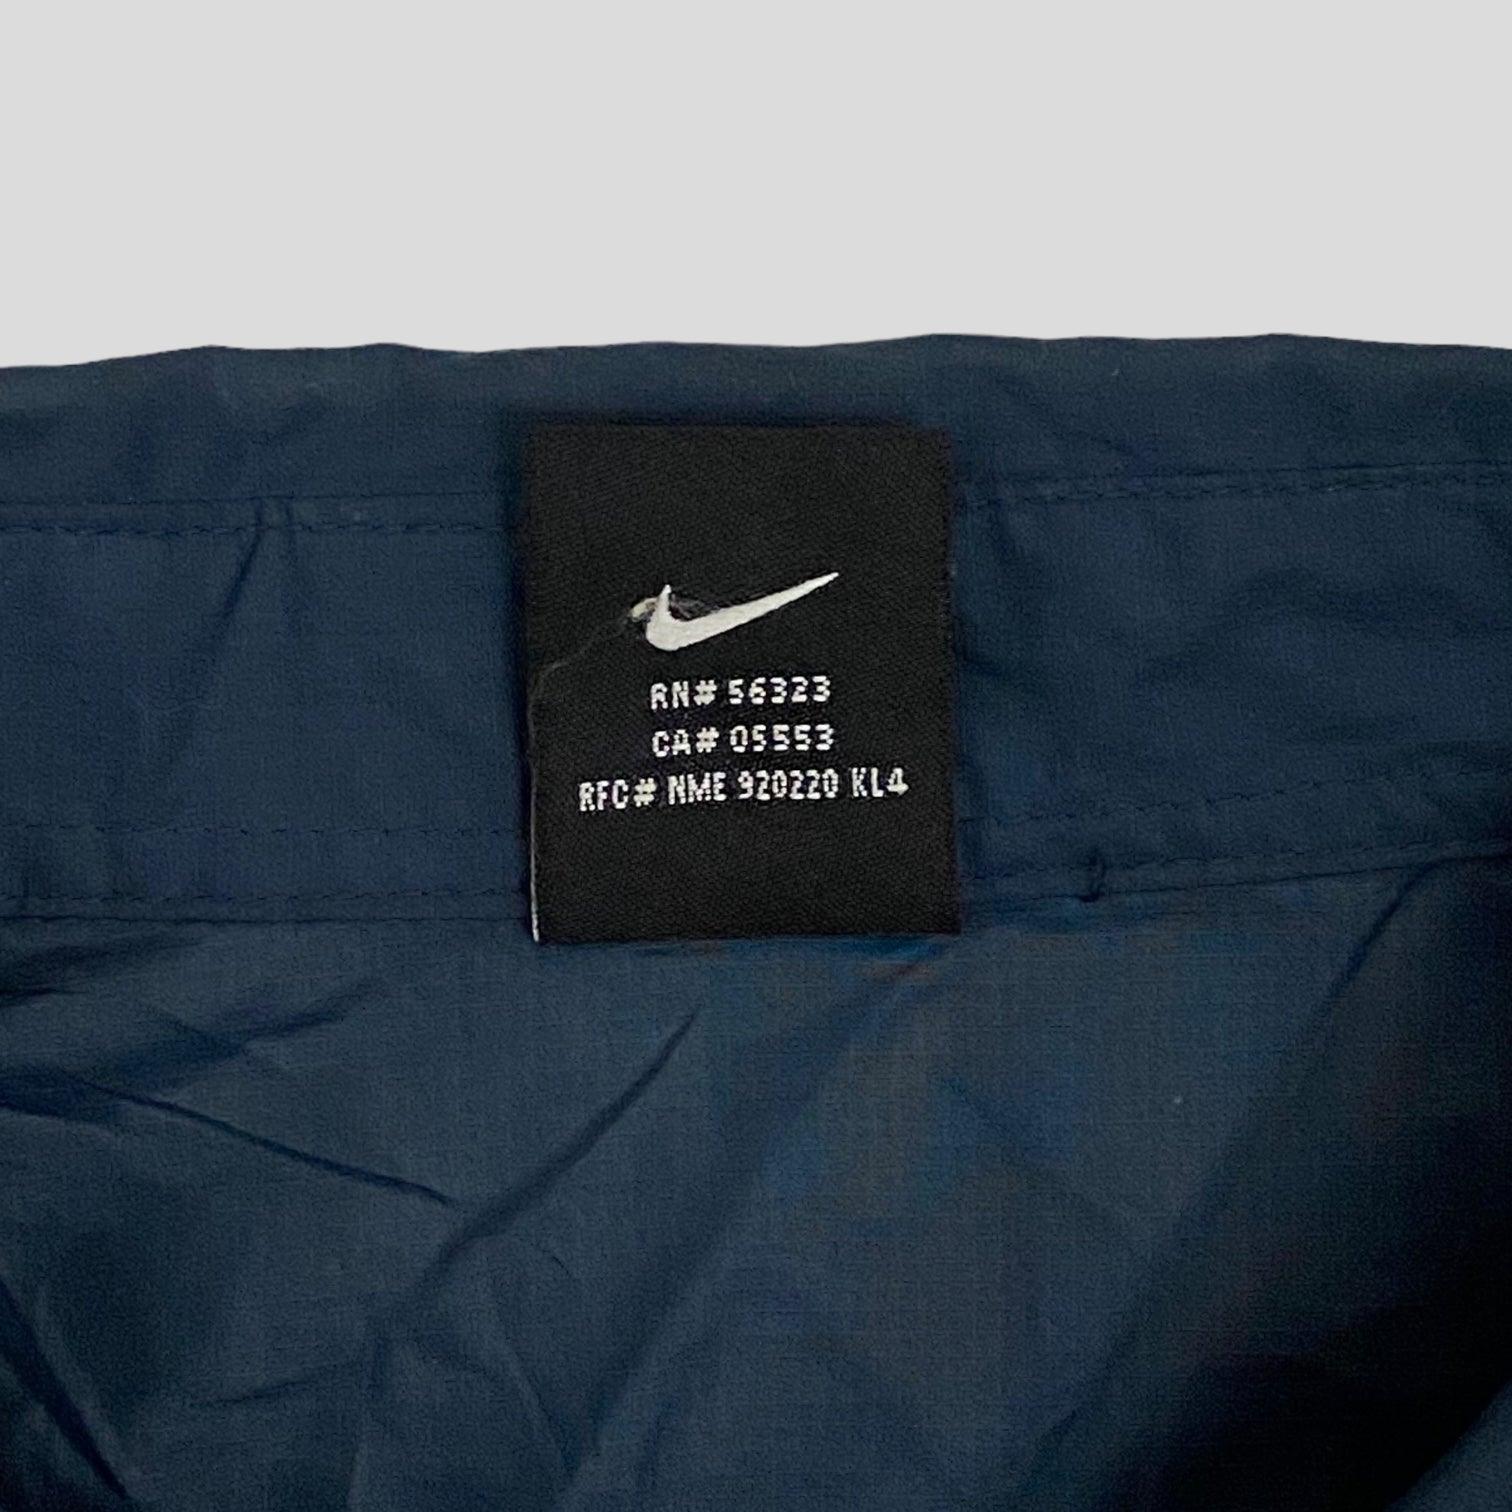 Nike ACG SS01 Technical Ripstop 2 in 1 Shirt - M - Known Source